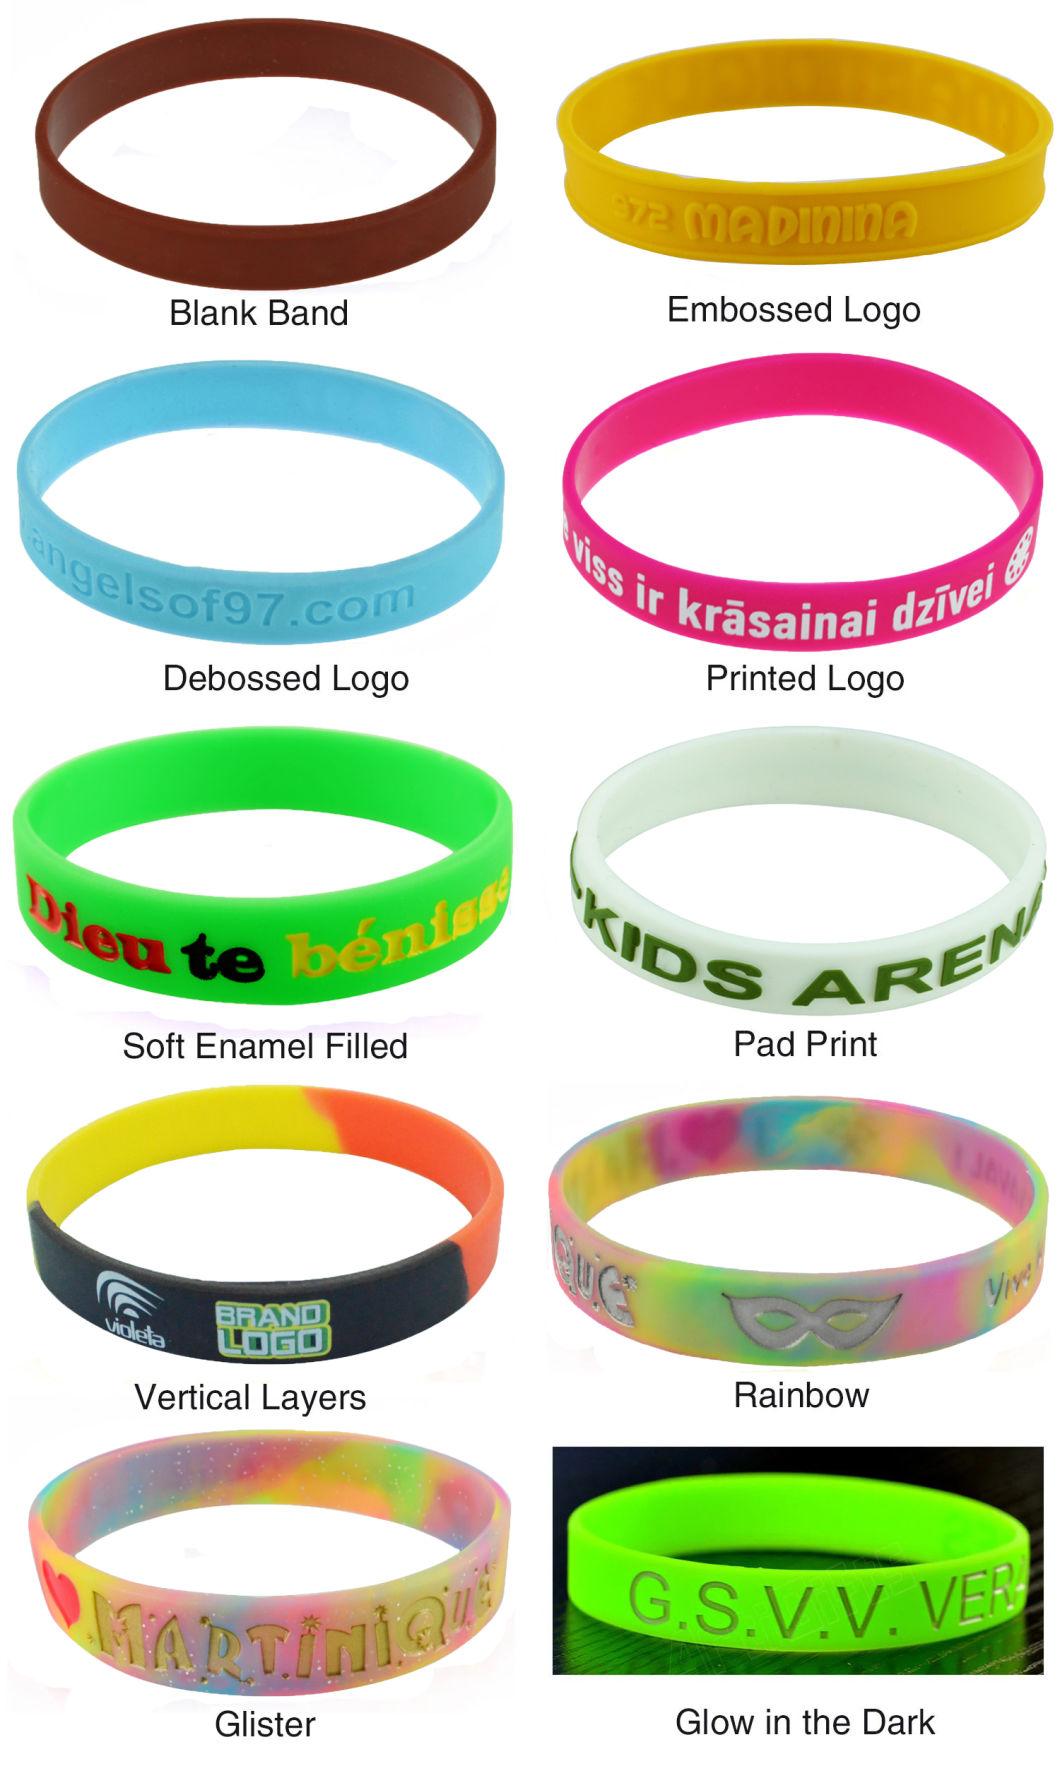 Custom Wholesale Printed Silicon Bracelet with Solid Color